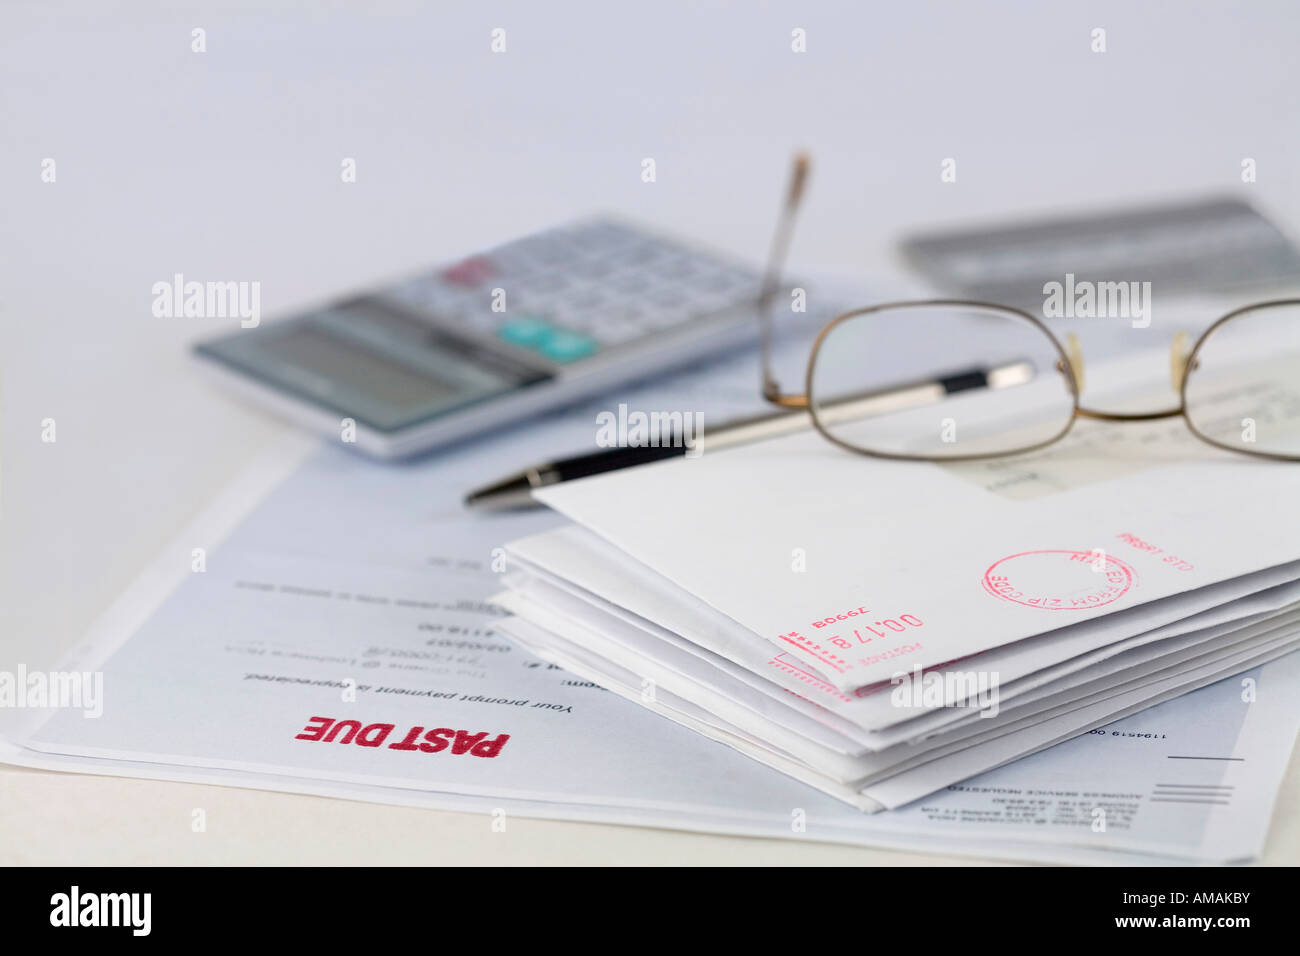 Stack of envelopes with pen, calculator, glasses and credit card Stock Photo